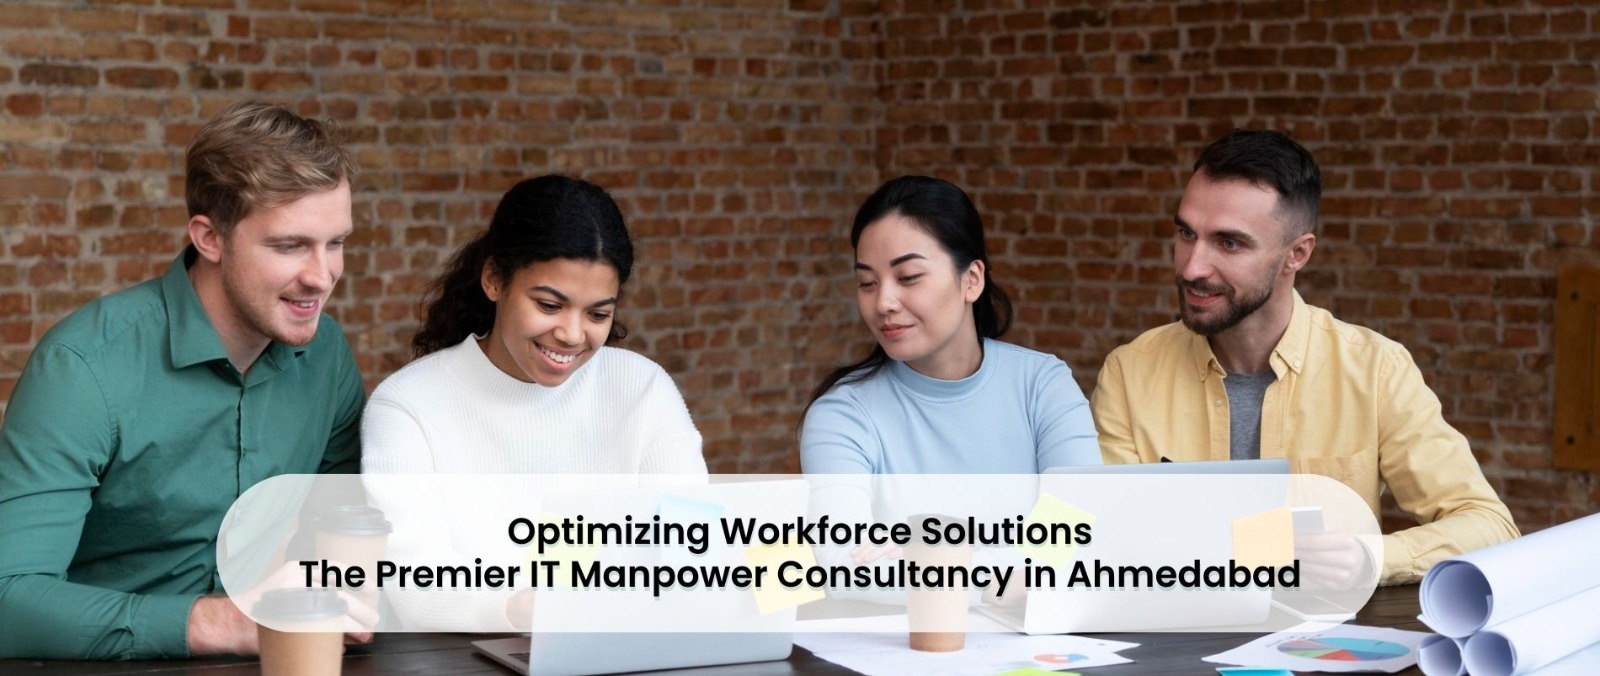 IT Manpower Consultancy in Ahmedabad